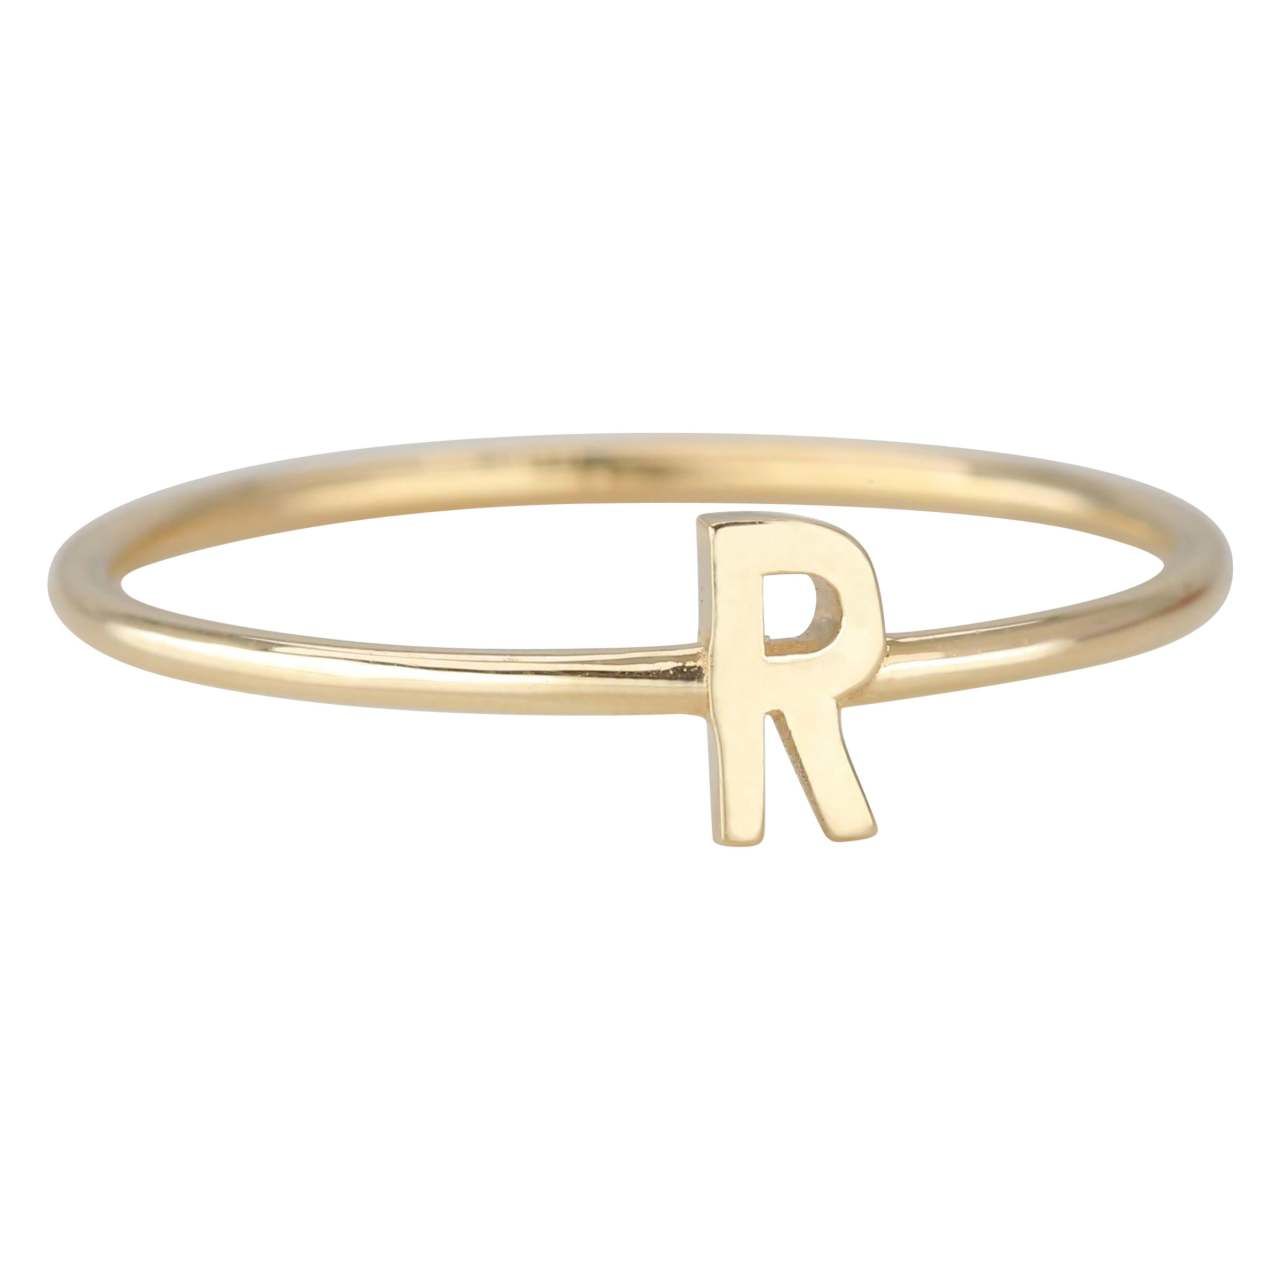 R Letter Ring Making Charges Making Charges